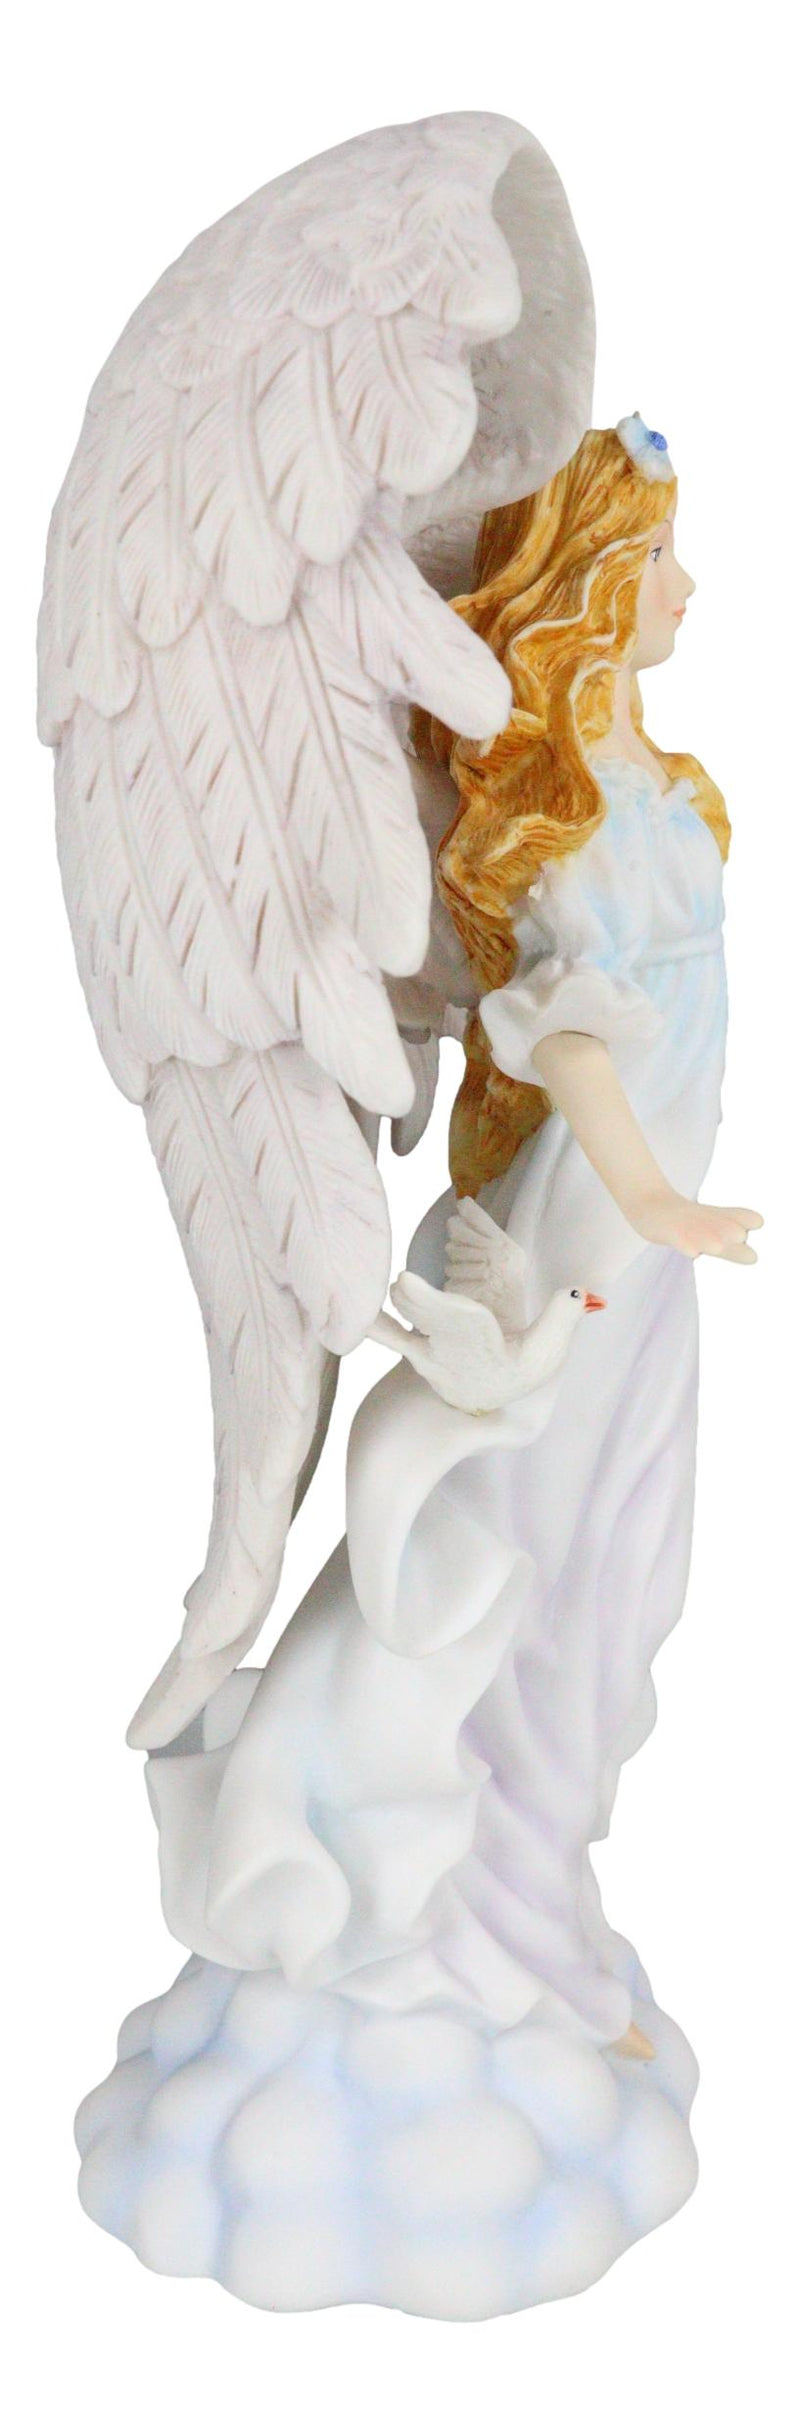 Beautiful Seraphim Angel of Purity With Doves Figurine First Communion Gift